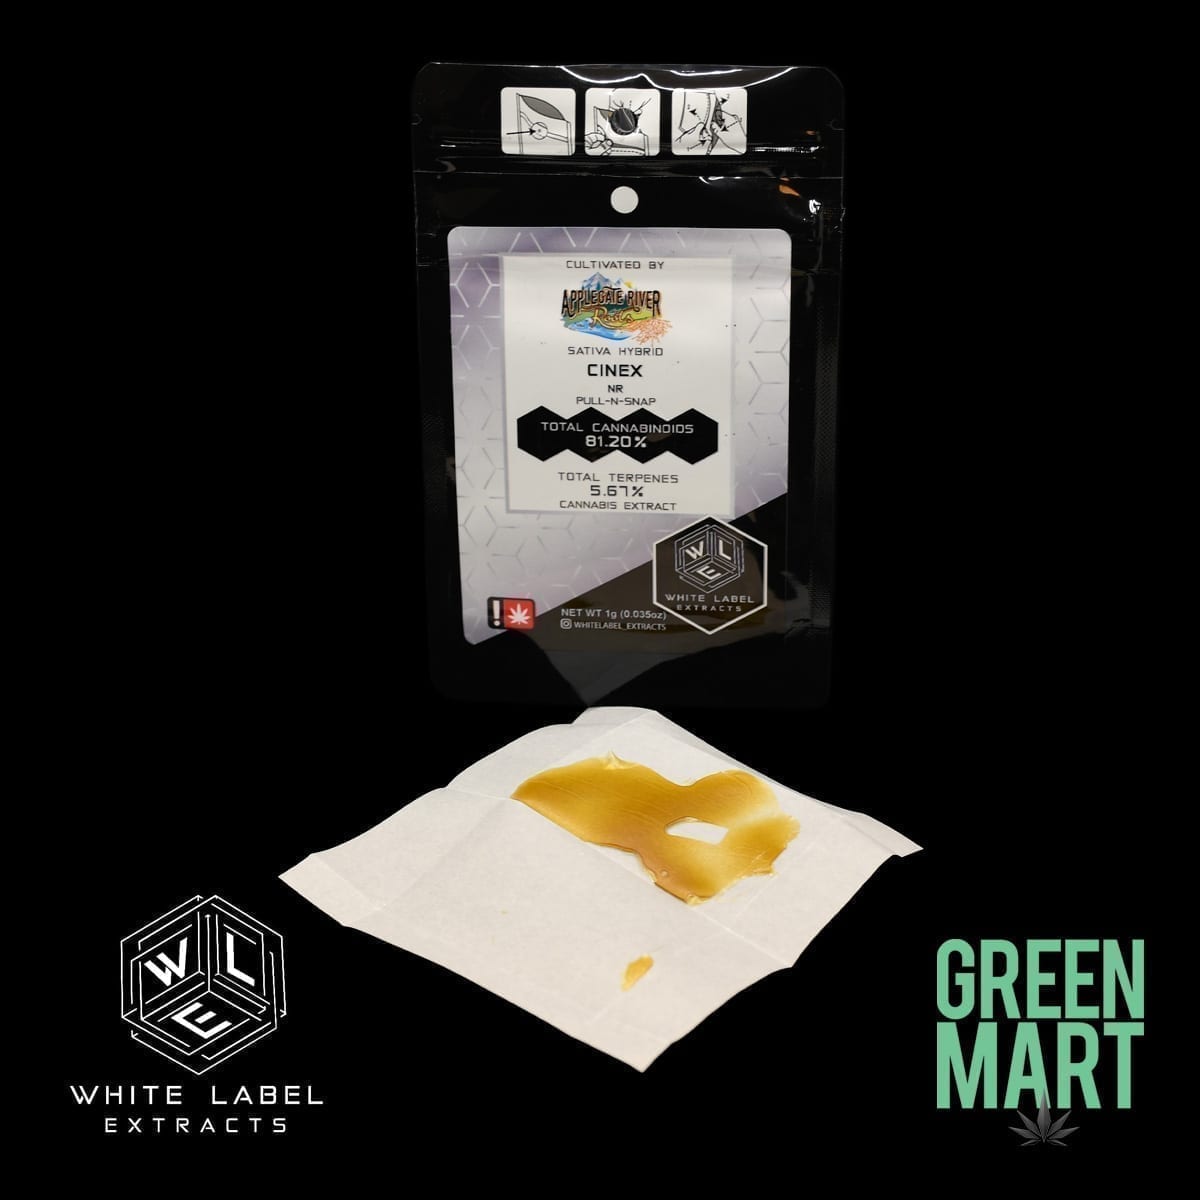 White Label Extracts - Cinex Pull-N-Snap